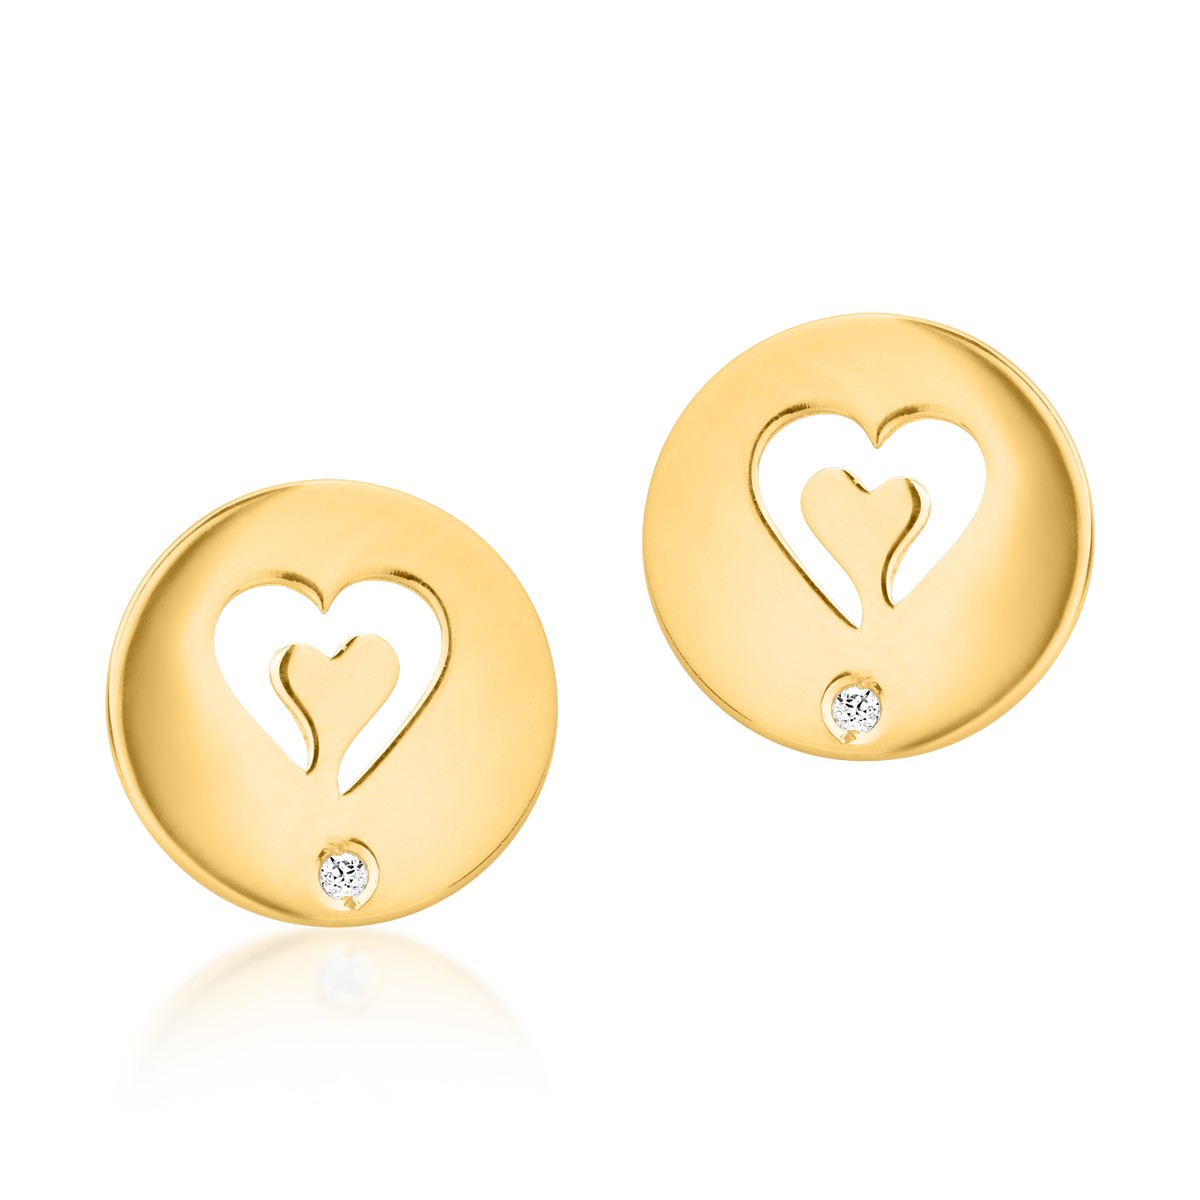 14K yellow gold coins and hearts earrings